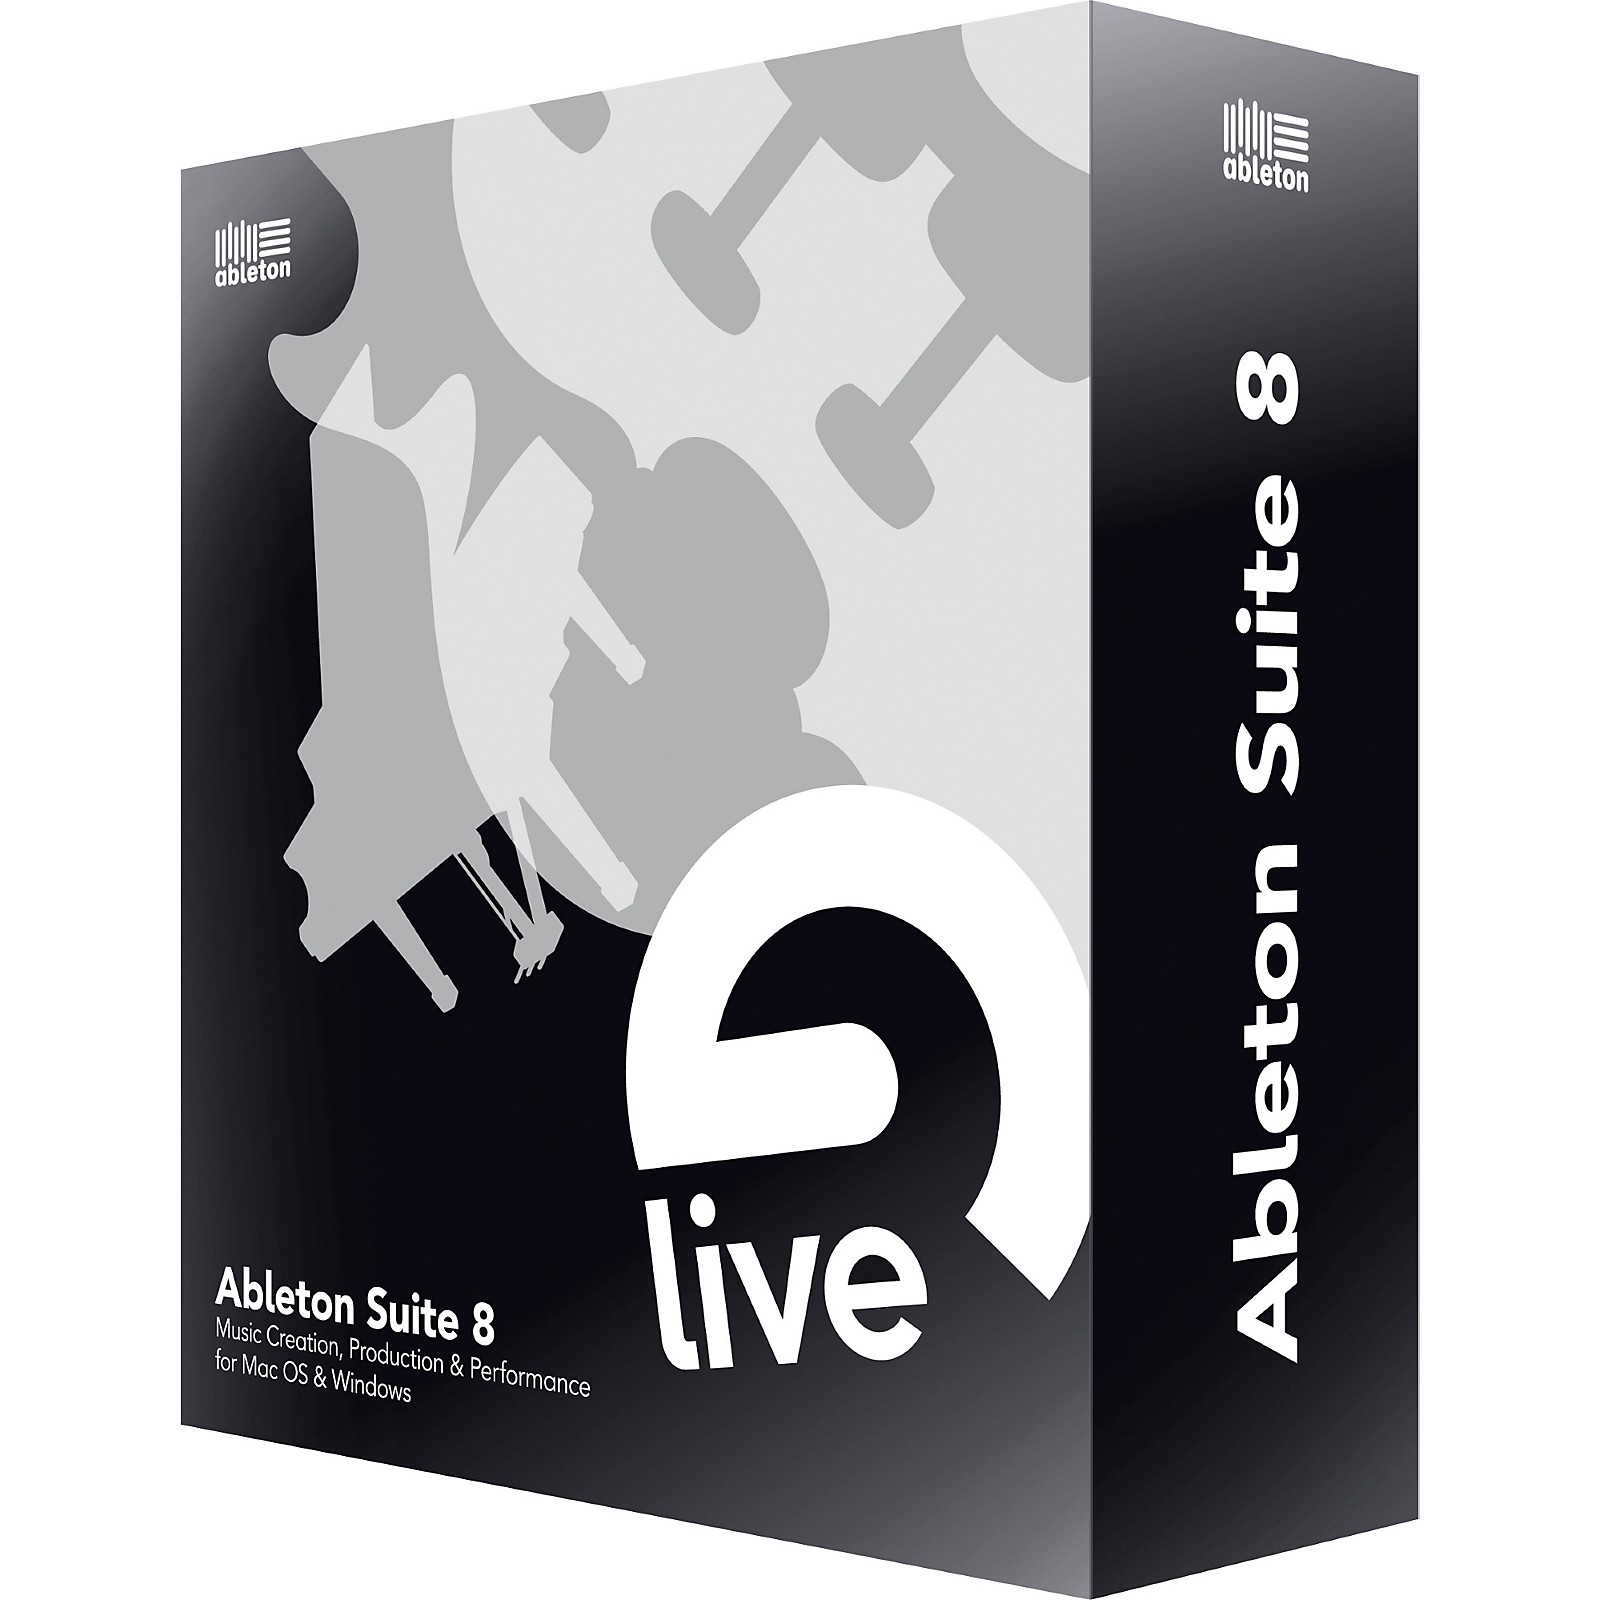 ableton suite upgrade